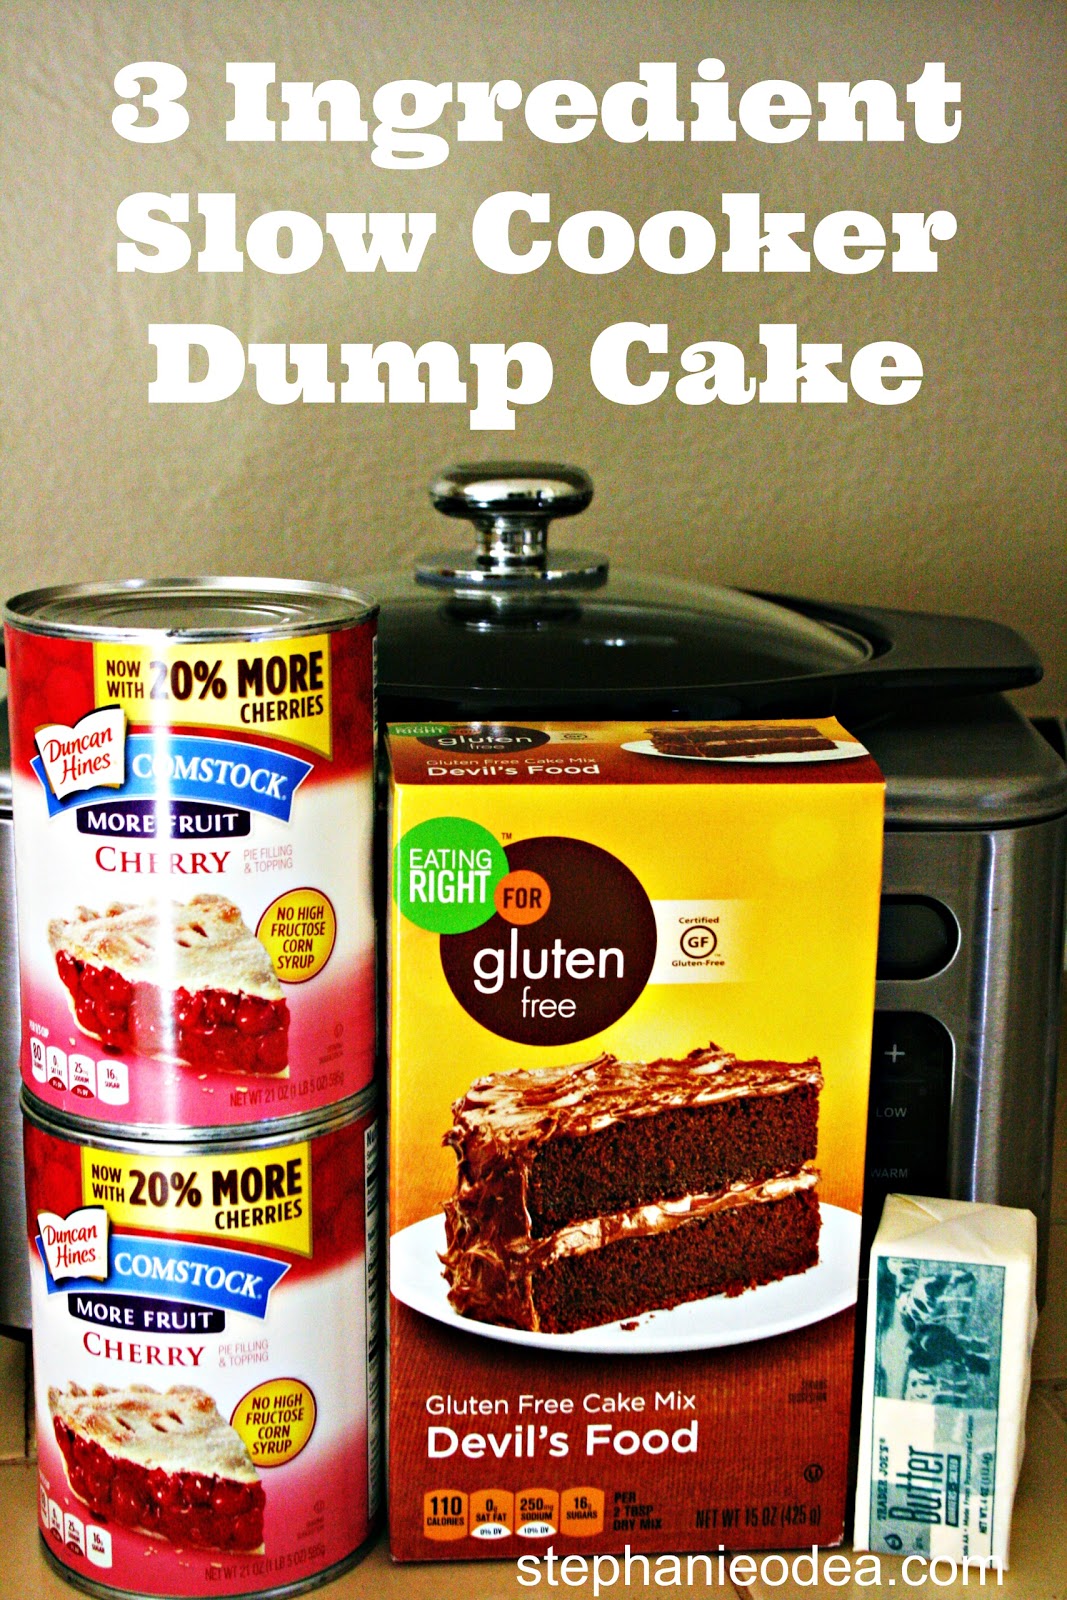 3-Ingredient Slow Cooker Dump Cake - A Year of Slow Cooking